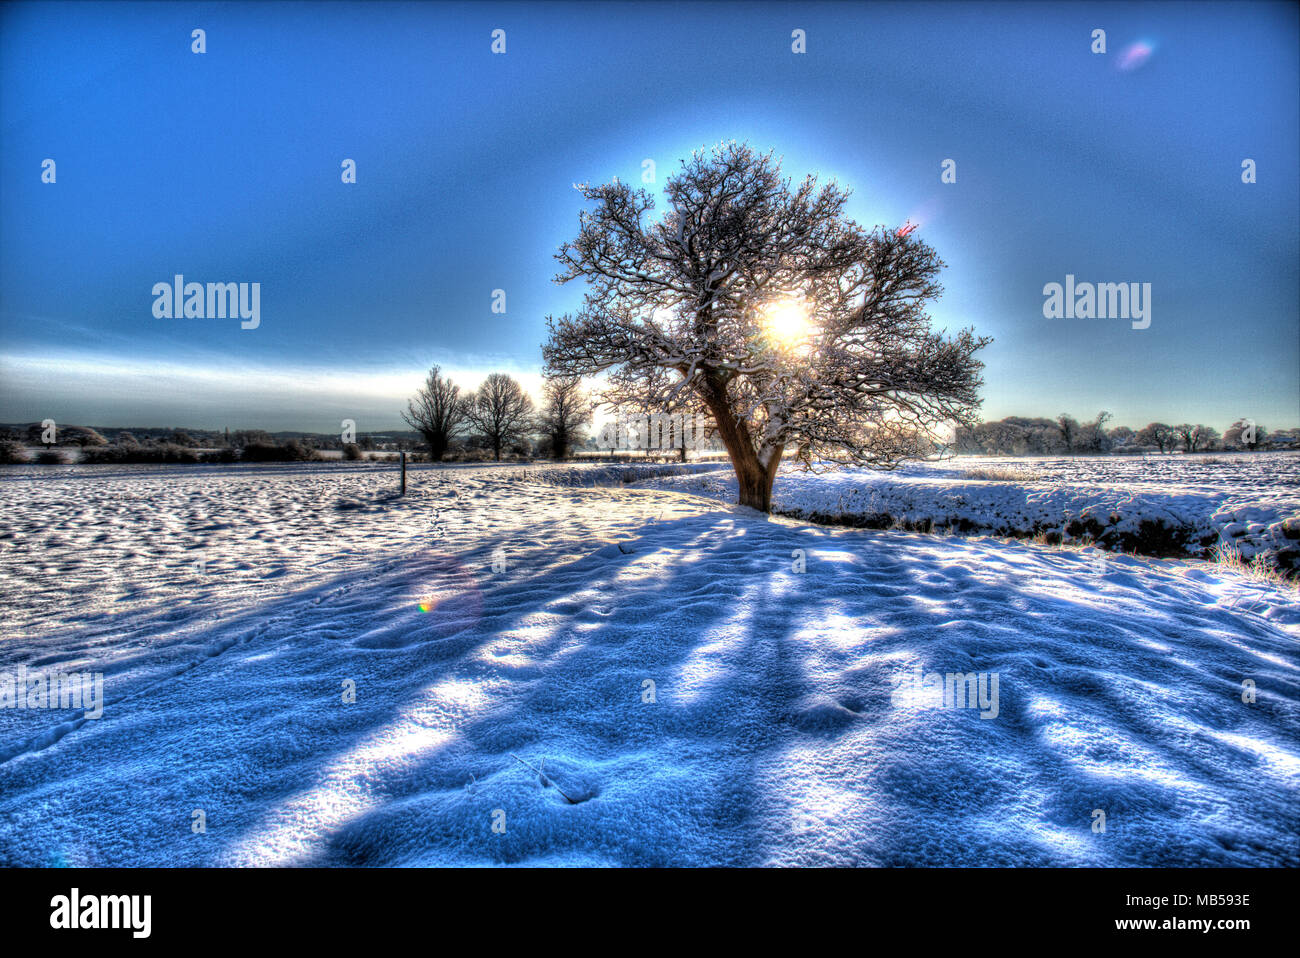 Village of Coddington, England. Artistic, snowy view of a pasture farming field in rural Cheshire, with a silhouetted oak tree in the background. Stock Photo